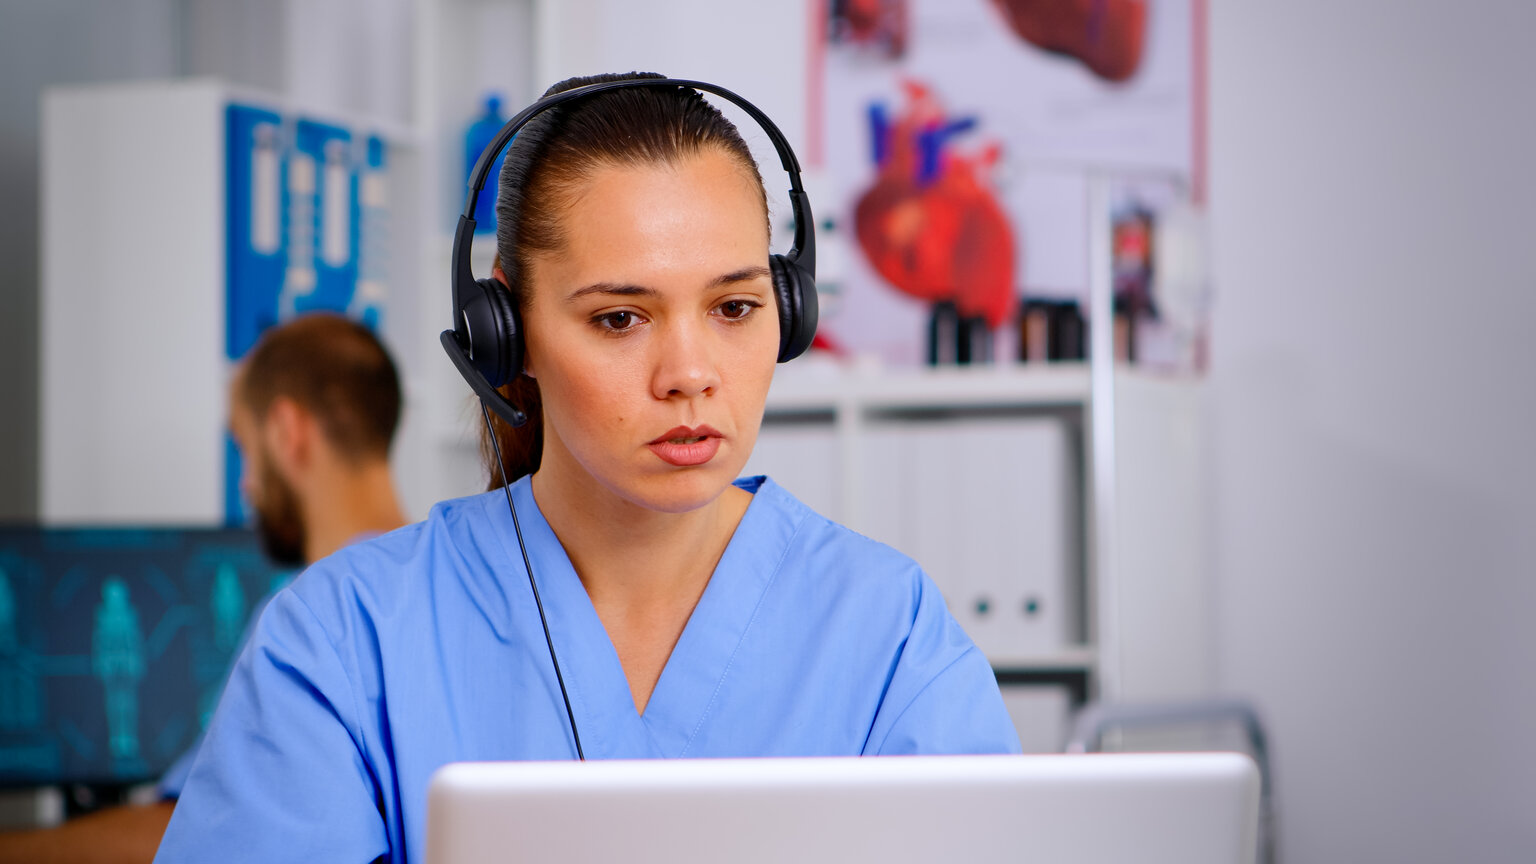 Image of The Importance of Call Centers for Health Services